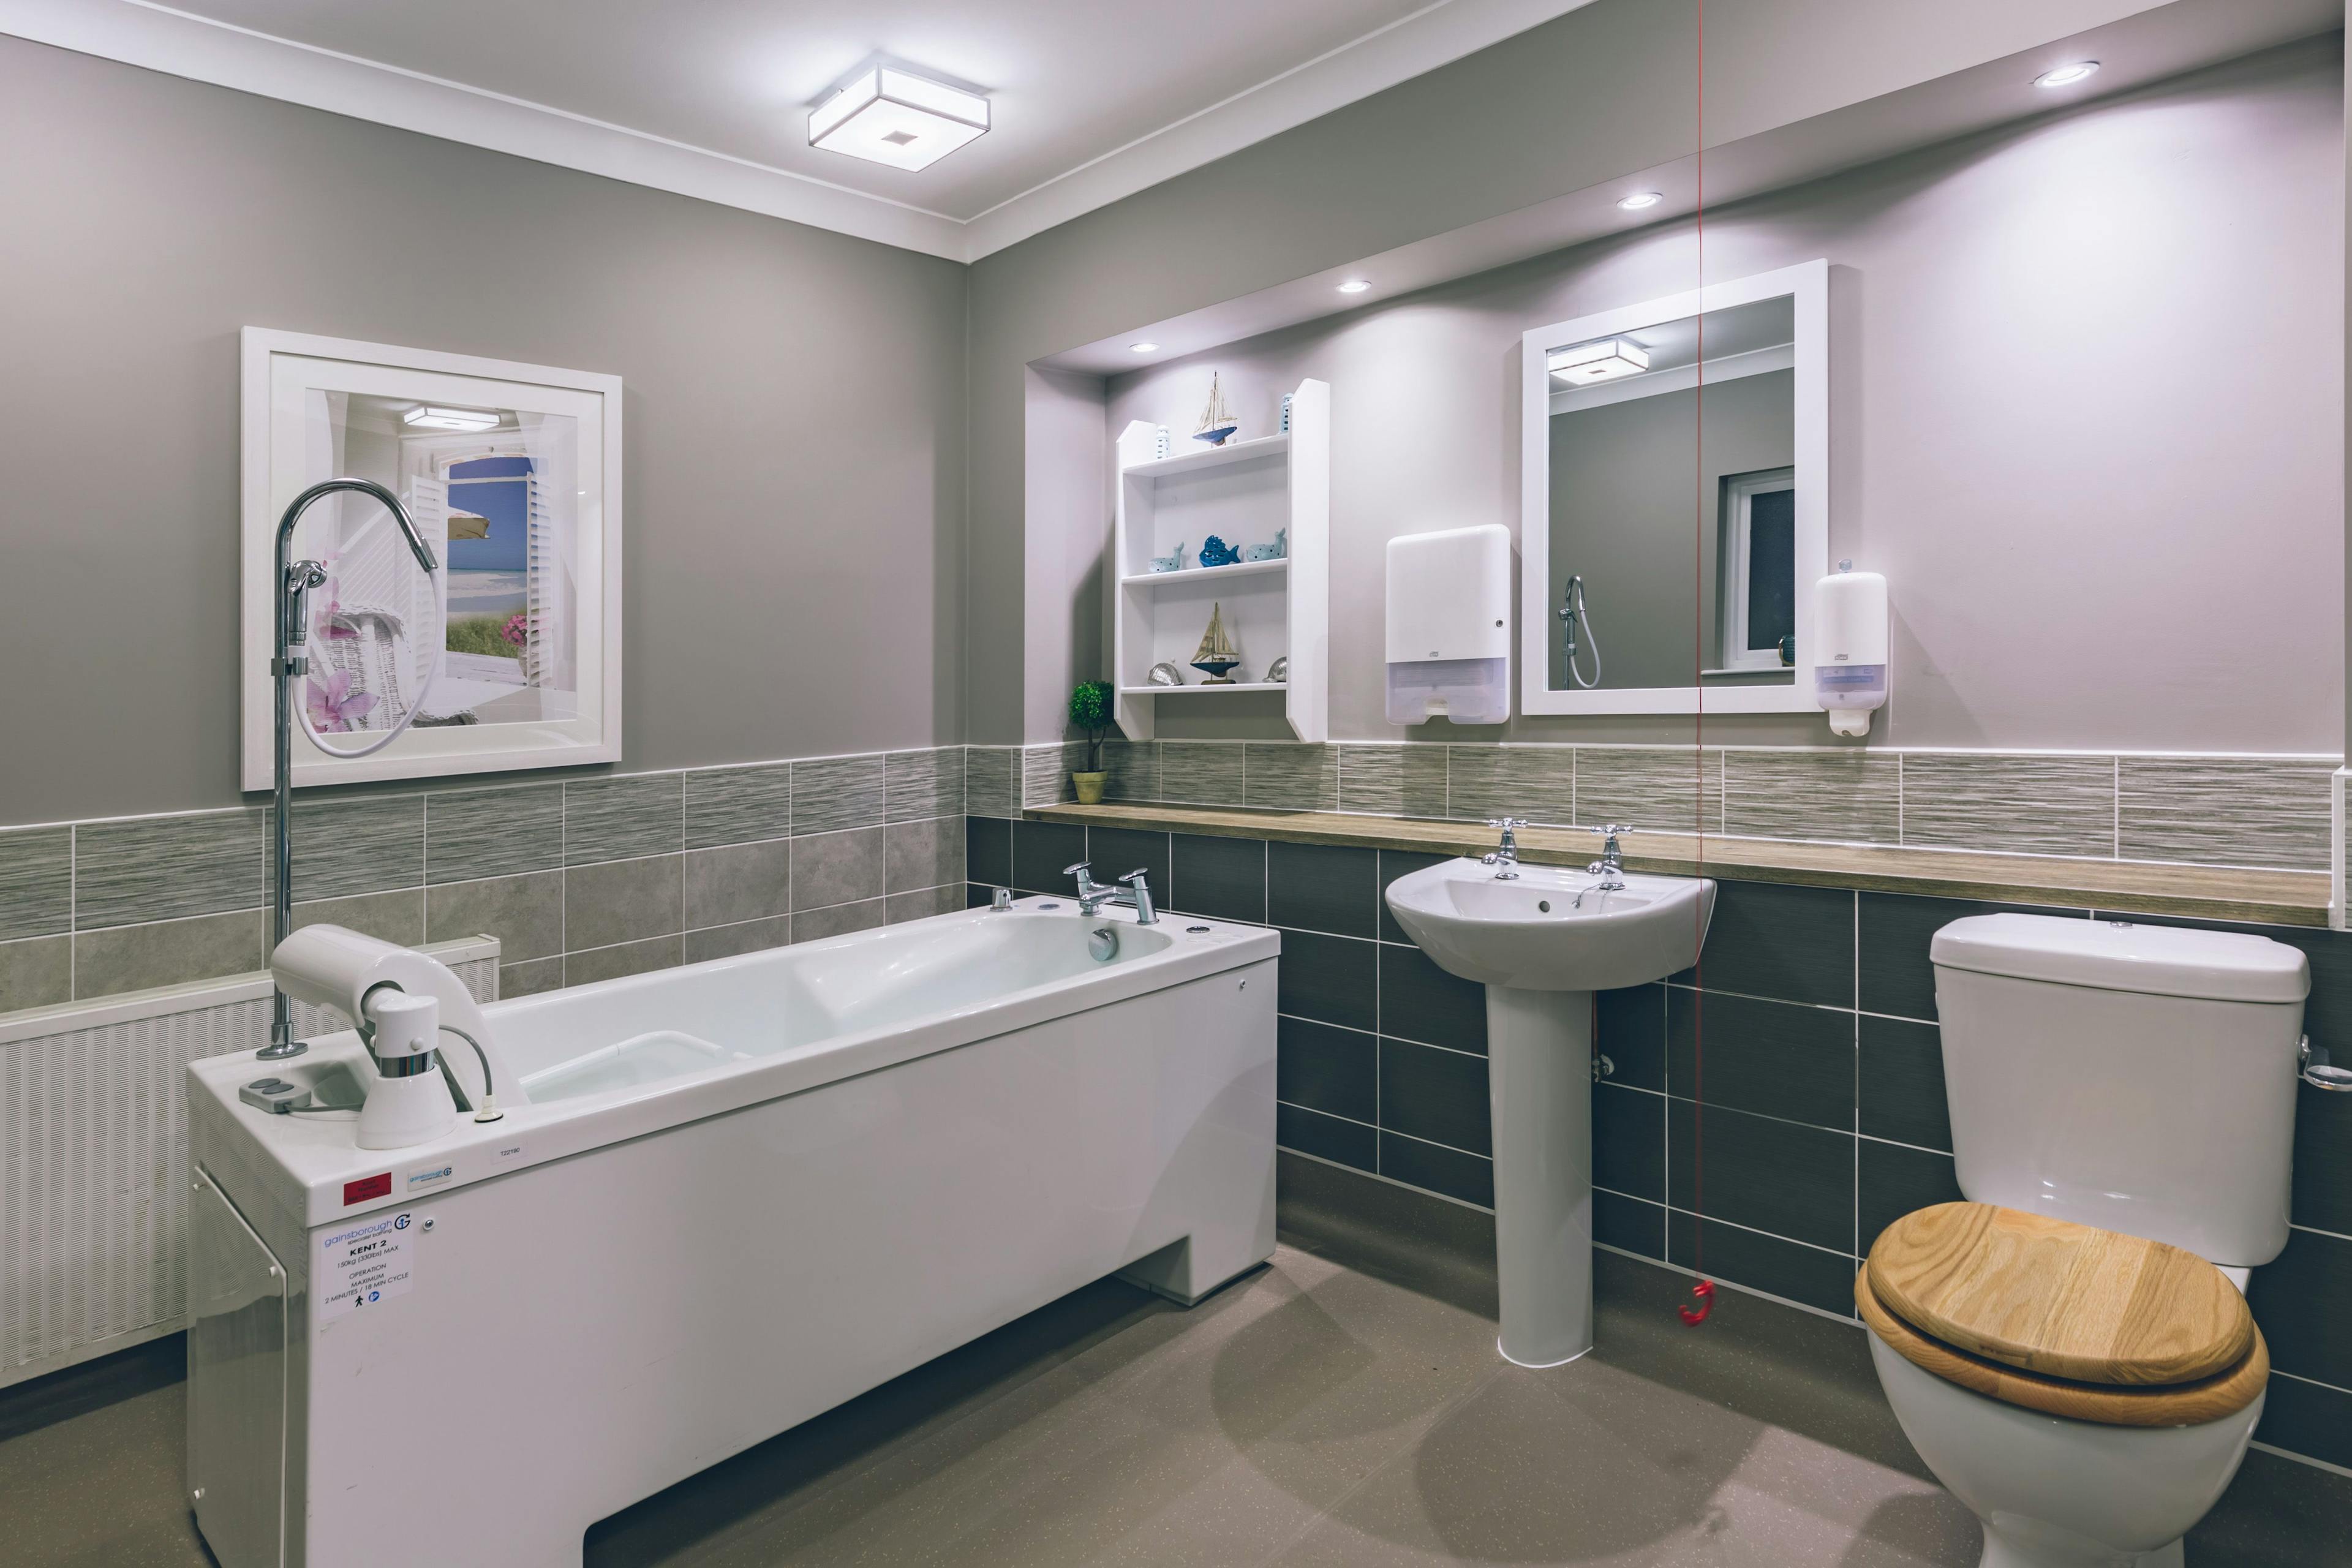 Bathroom of Vecta House Care Home in Newport, Isle of Wight